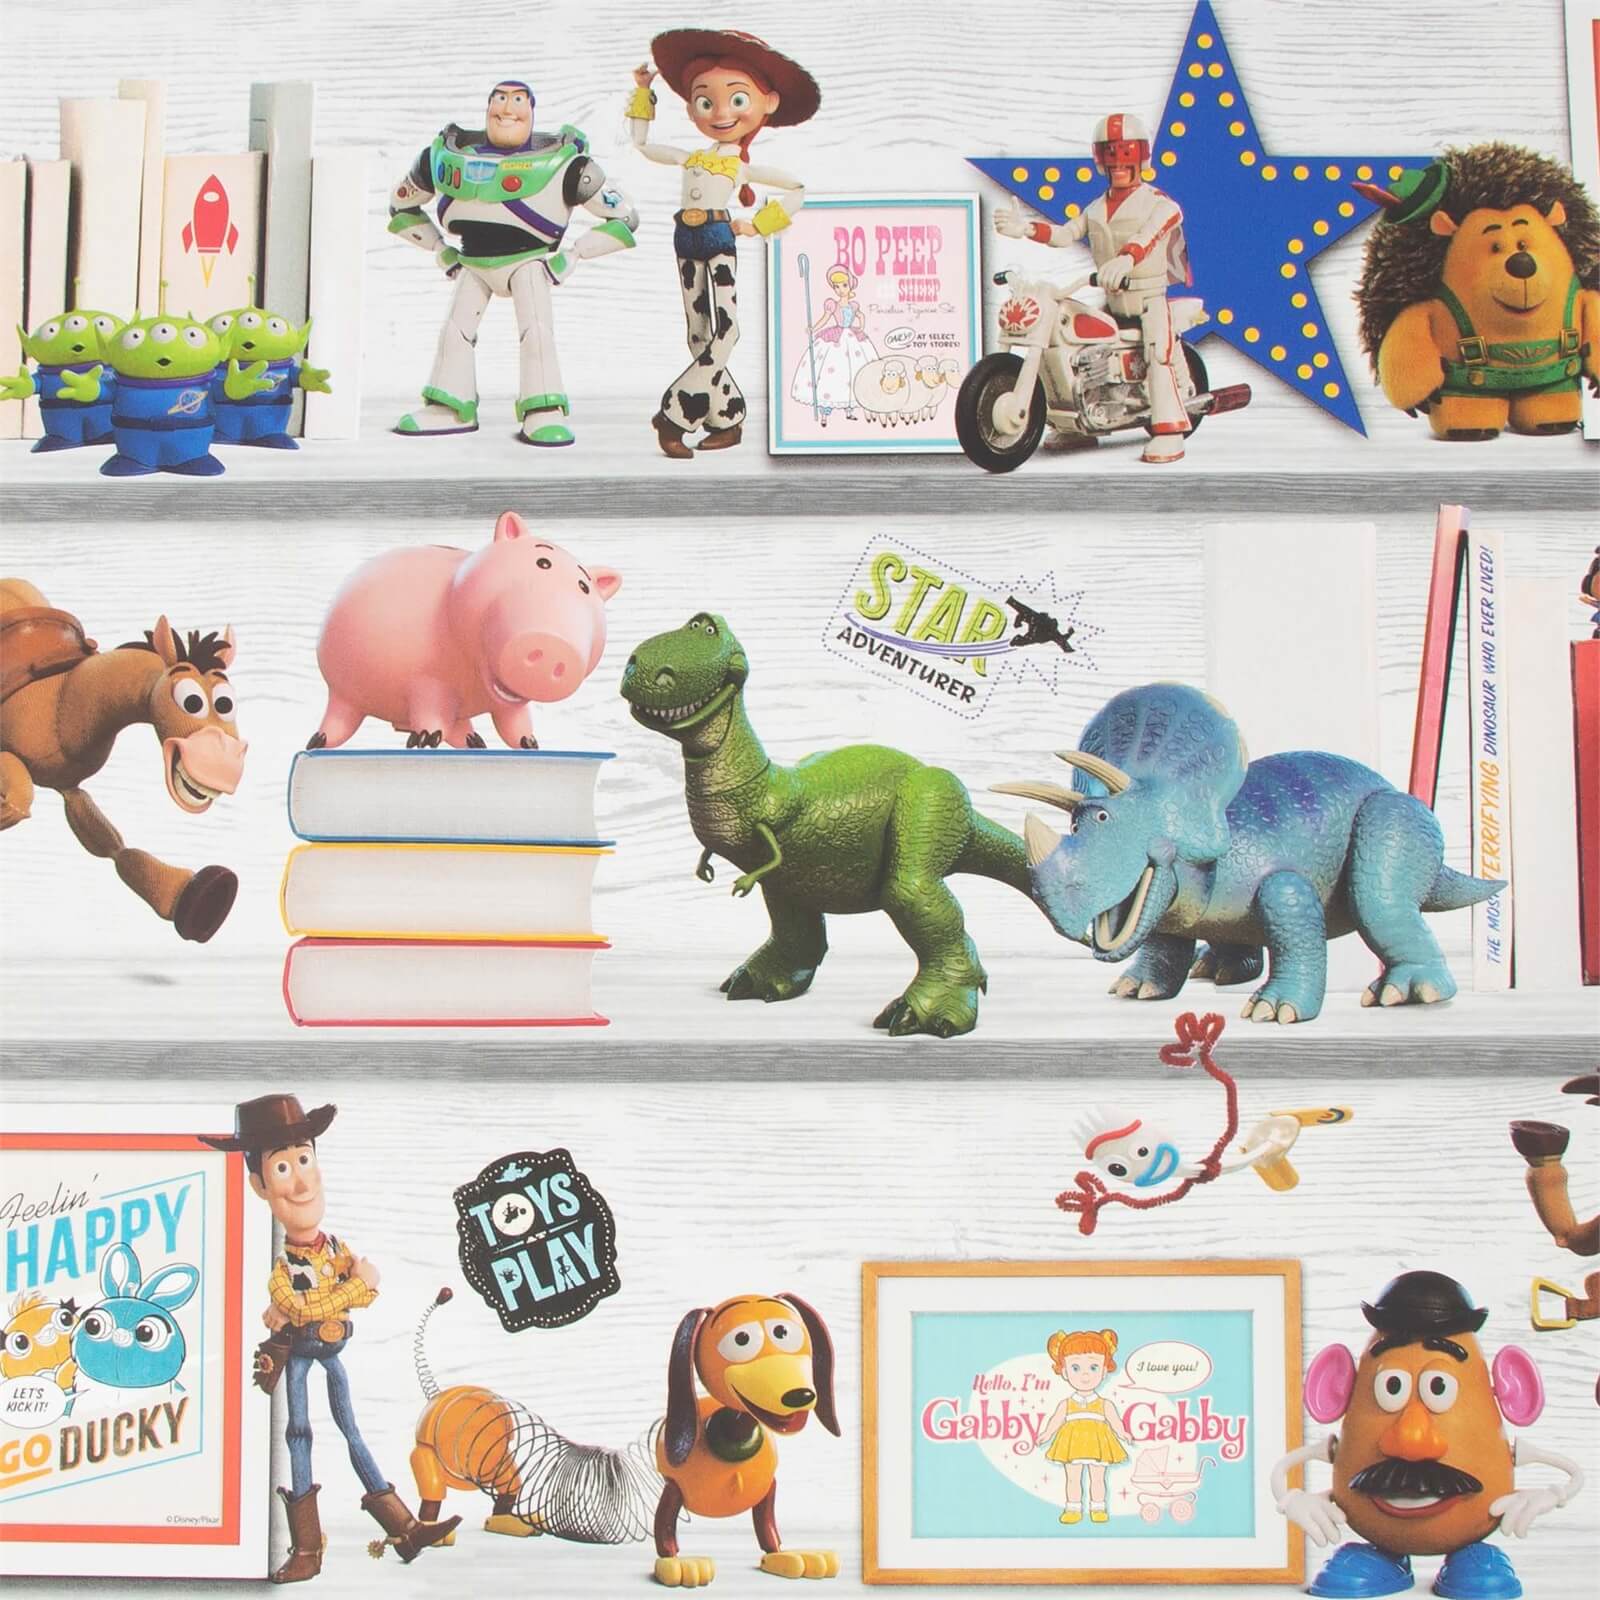 Disney Toy Story 4 - Play Date Wallpaper